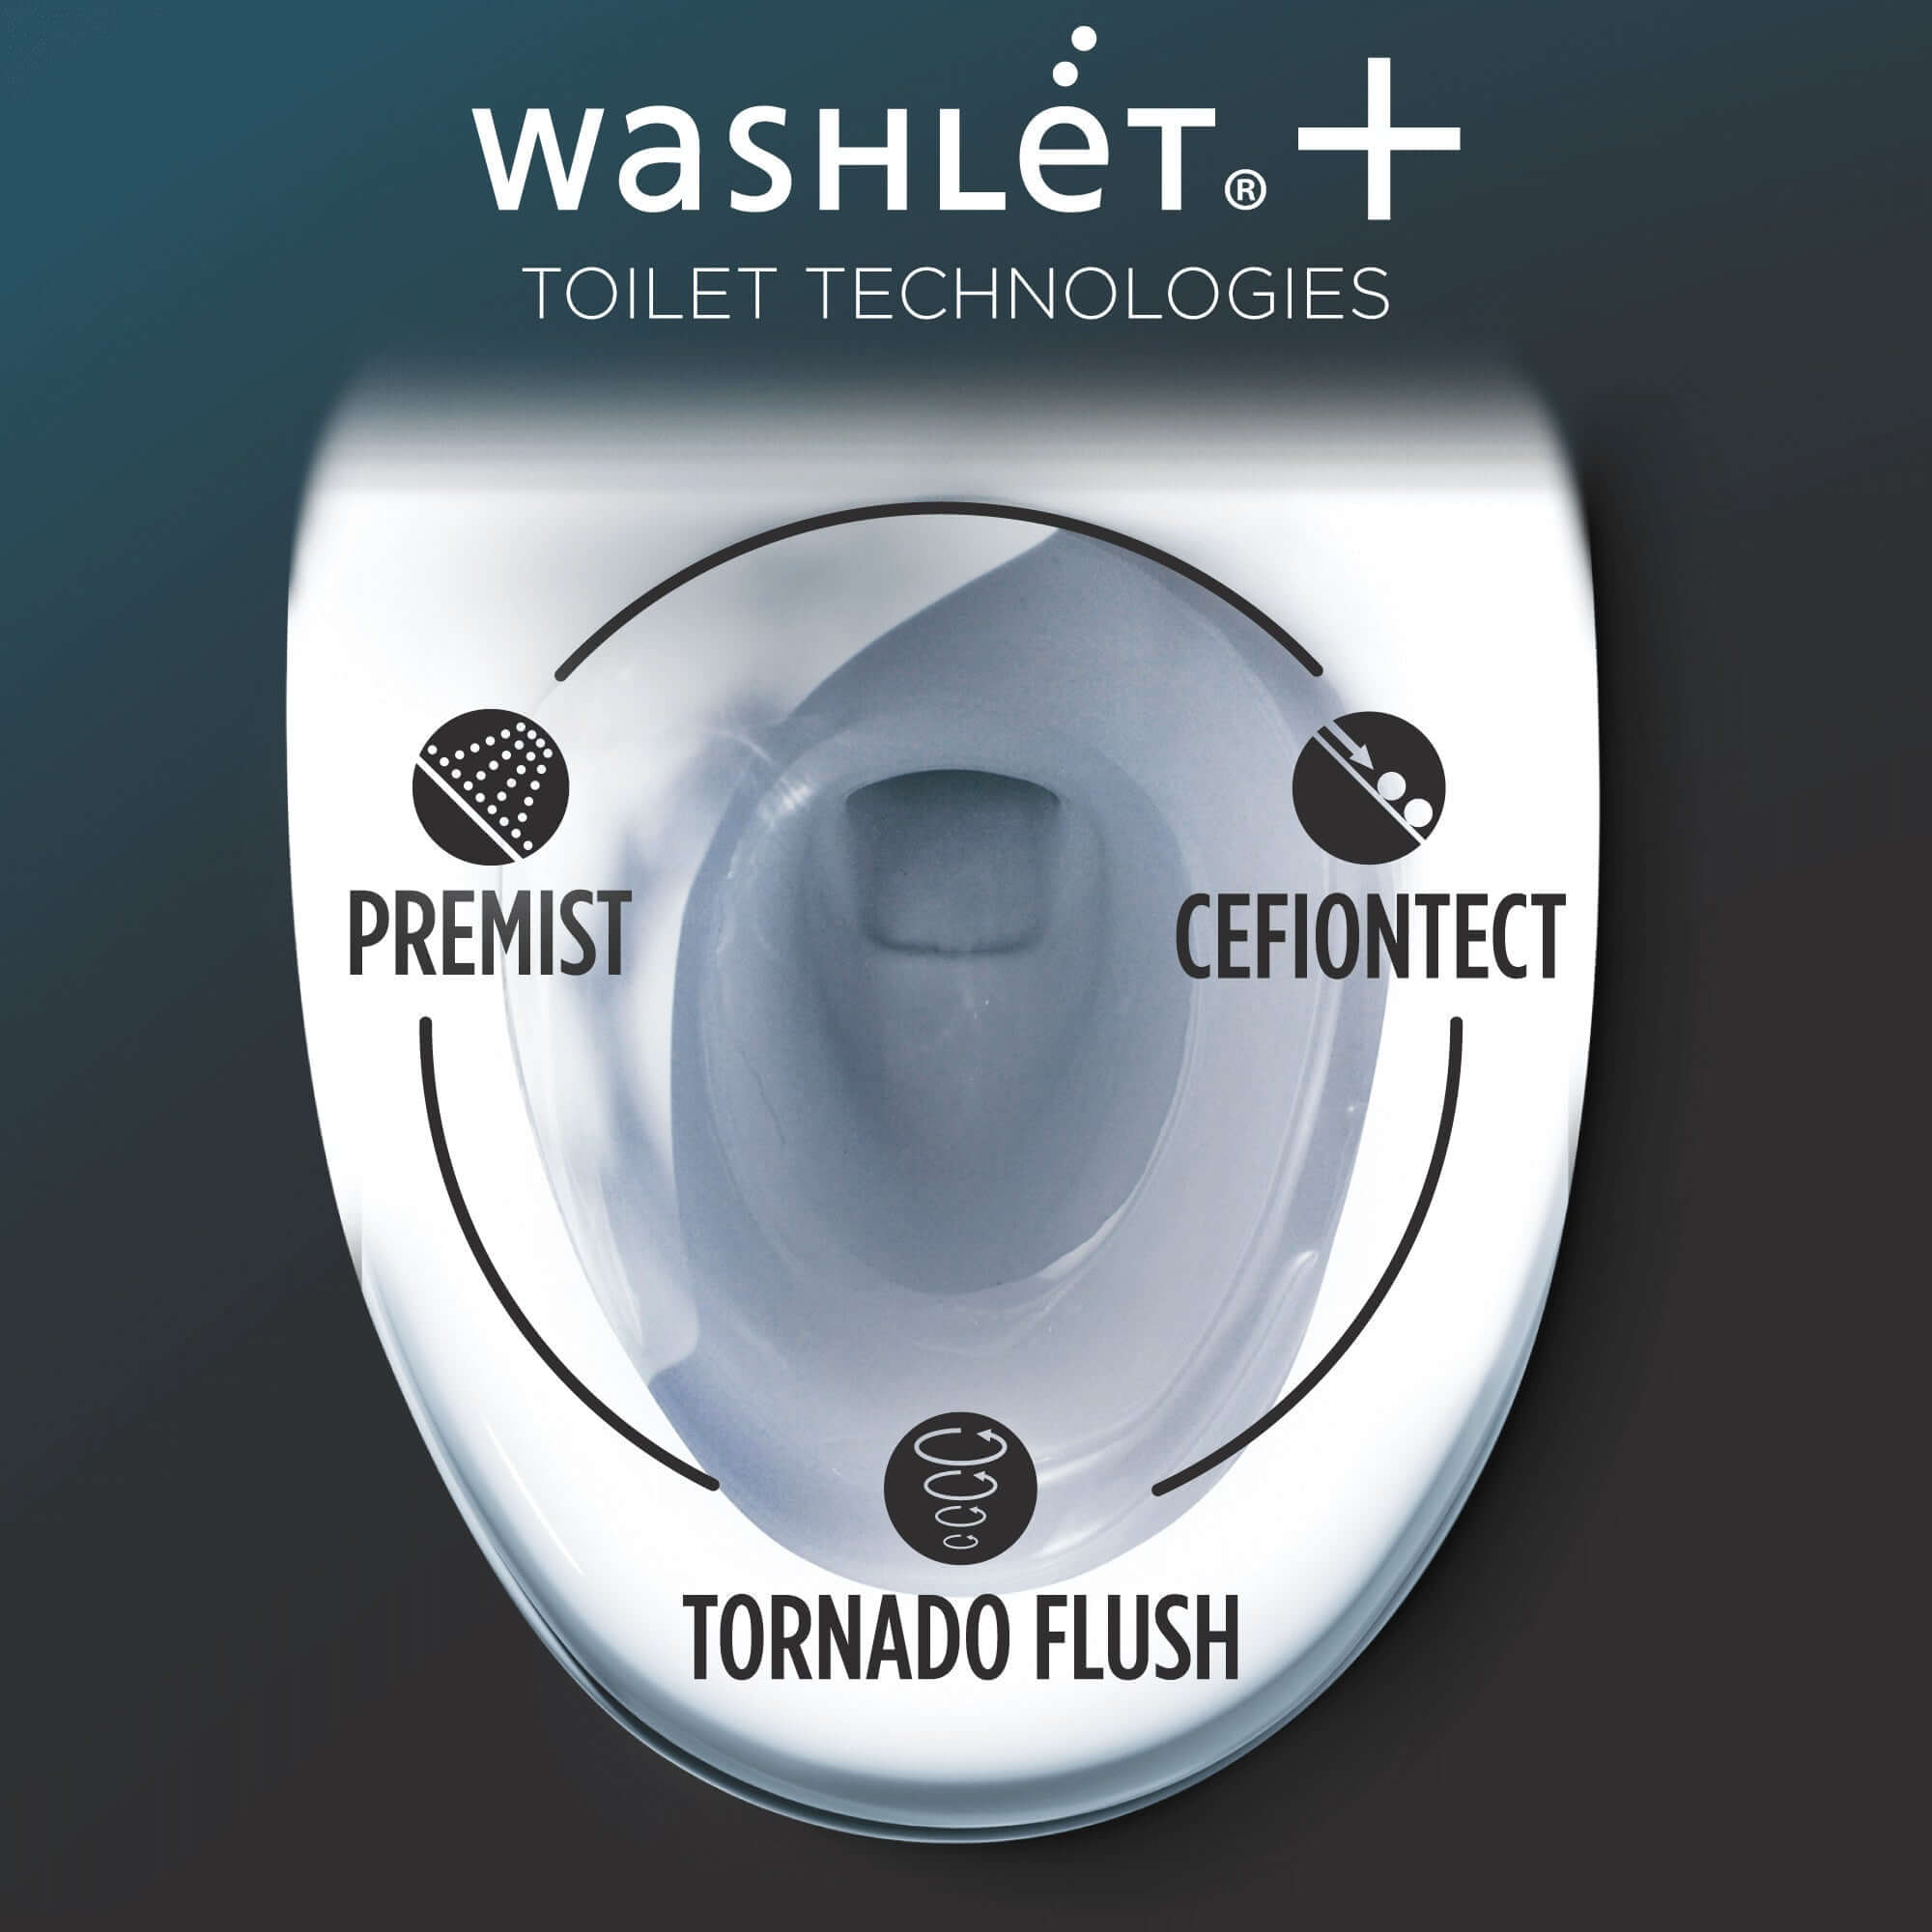 TOTO WASHLET+ Aquia IV ARC Two-Piece Universal Height Dual Flush 1.28 and 0.9 GPF Toilet with C2 Bidet Seat - MW4483074CEMFGN#01